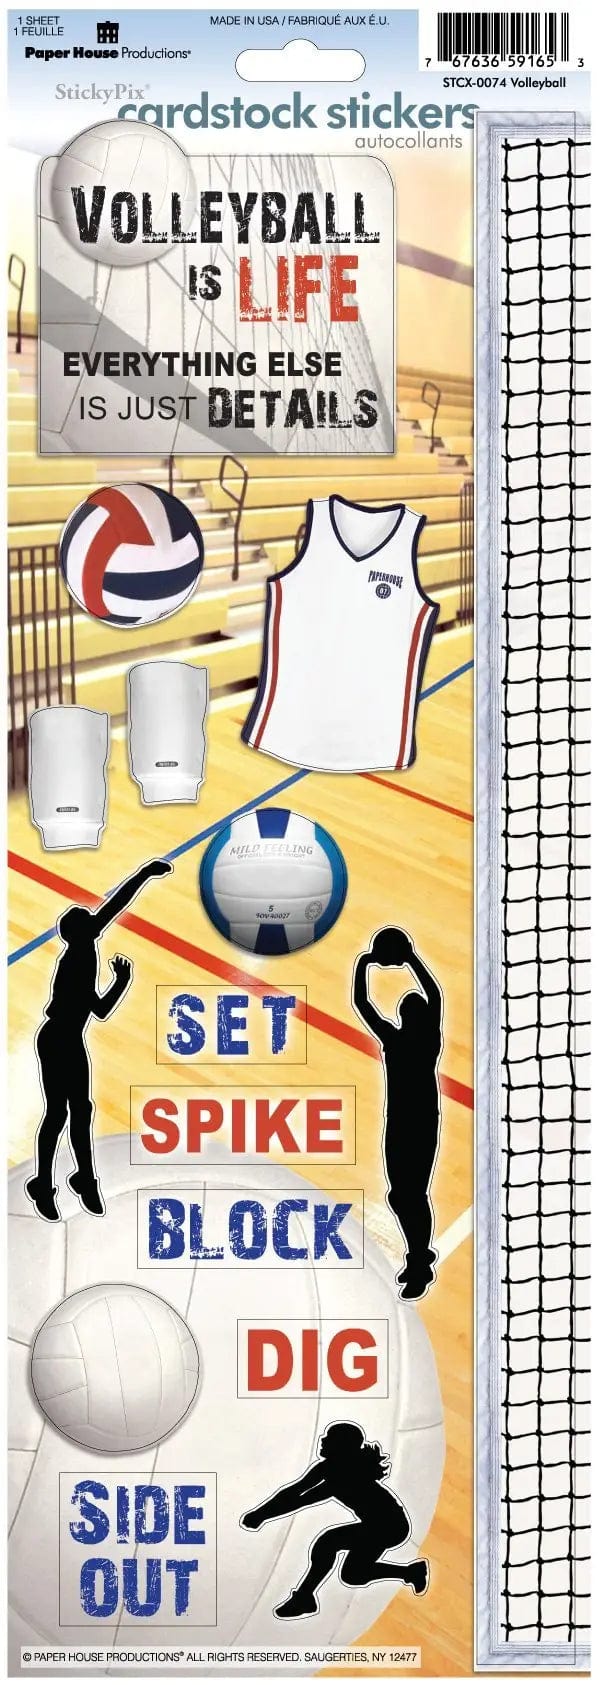 Volleyball Collection Volleyball Is Life 5 x 12 Cardstock Sticker Sheet by Paper House Productions - Scrapbook Supply Companies